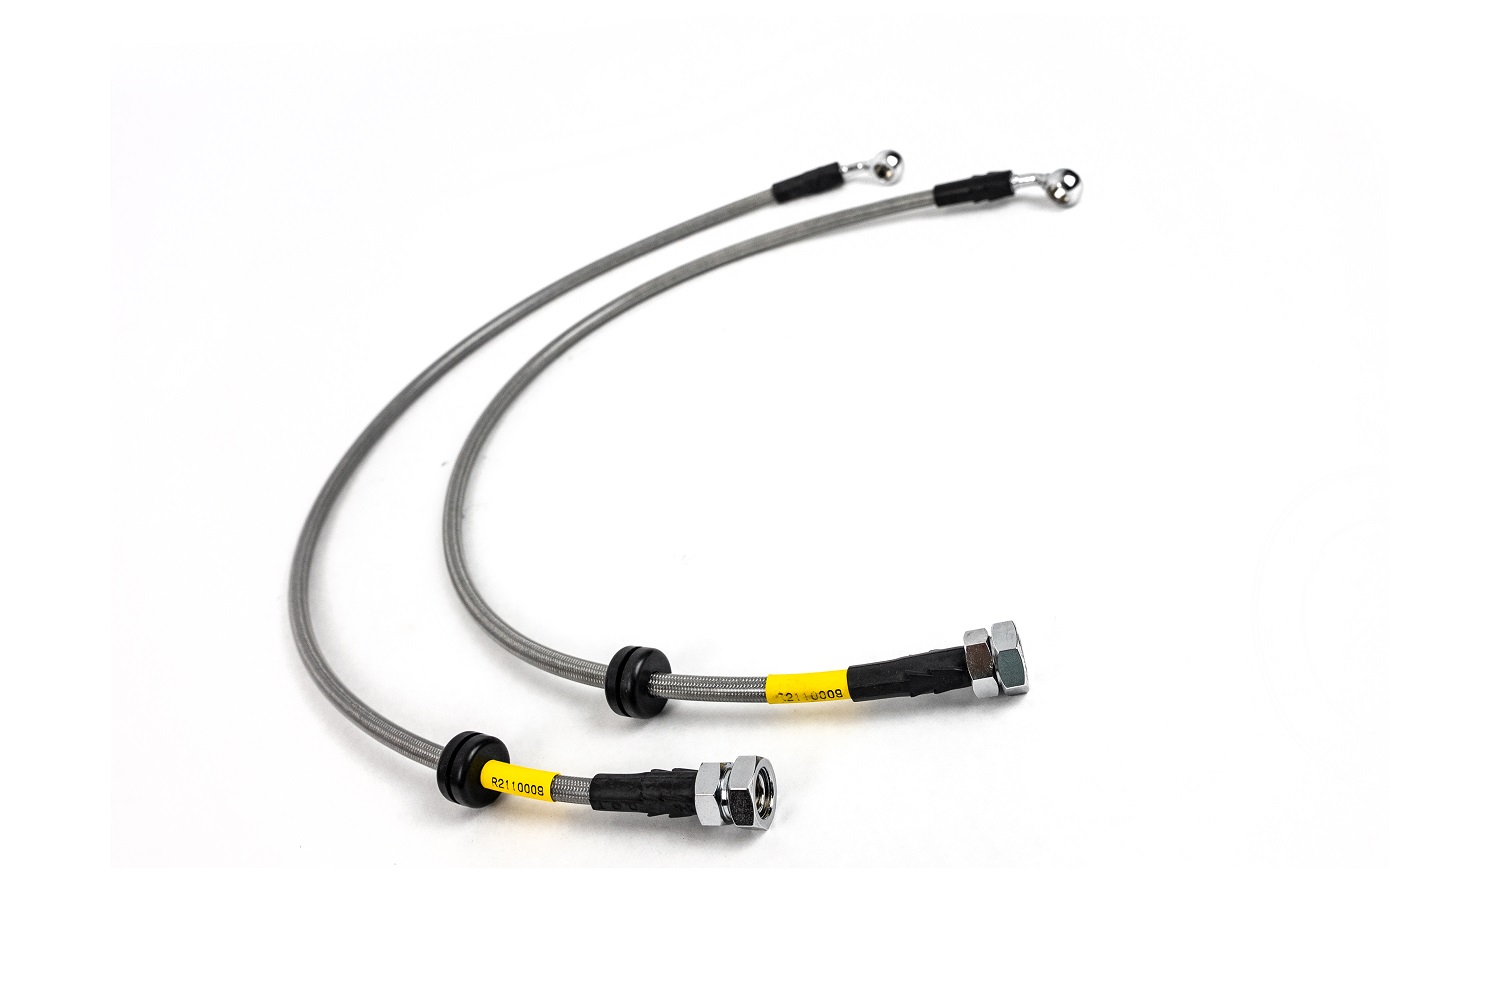 DOT approved Stainless Steel brake lines included with every kit